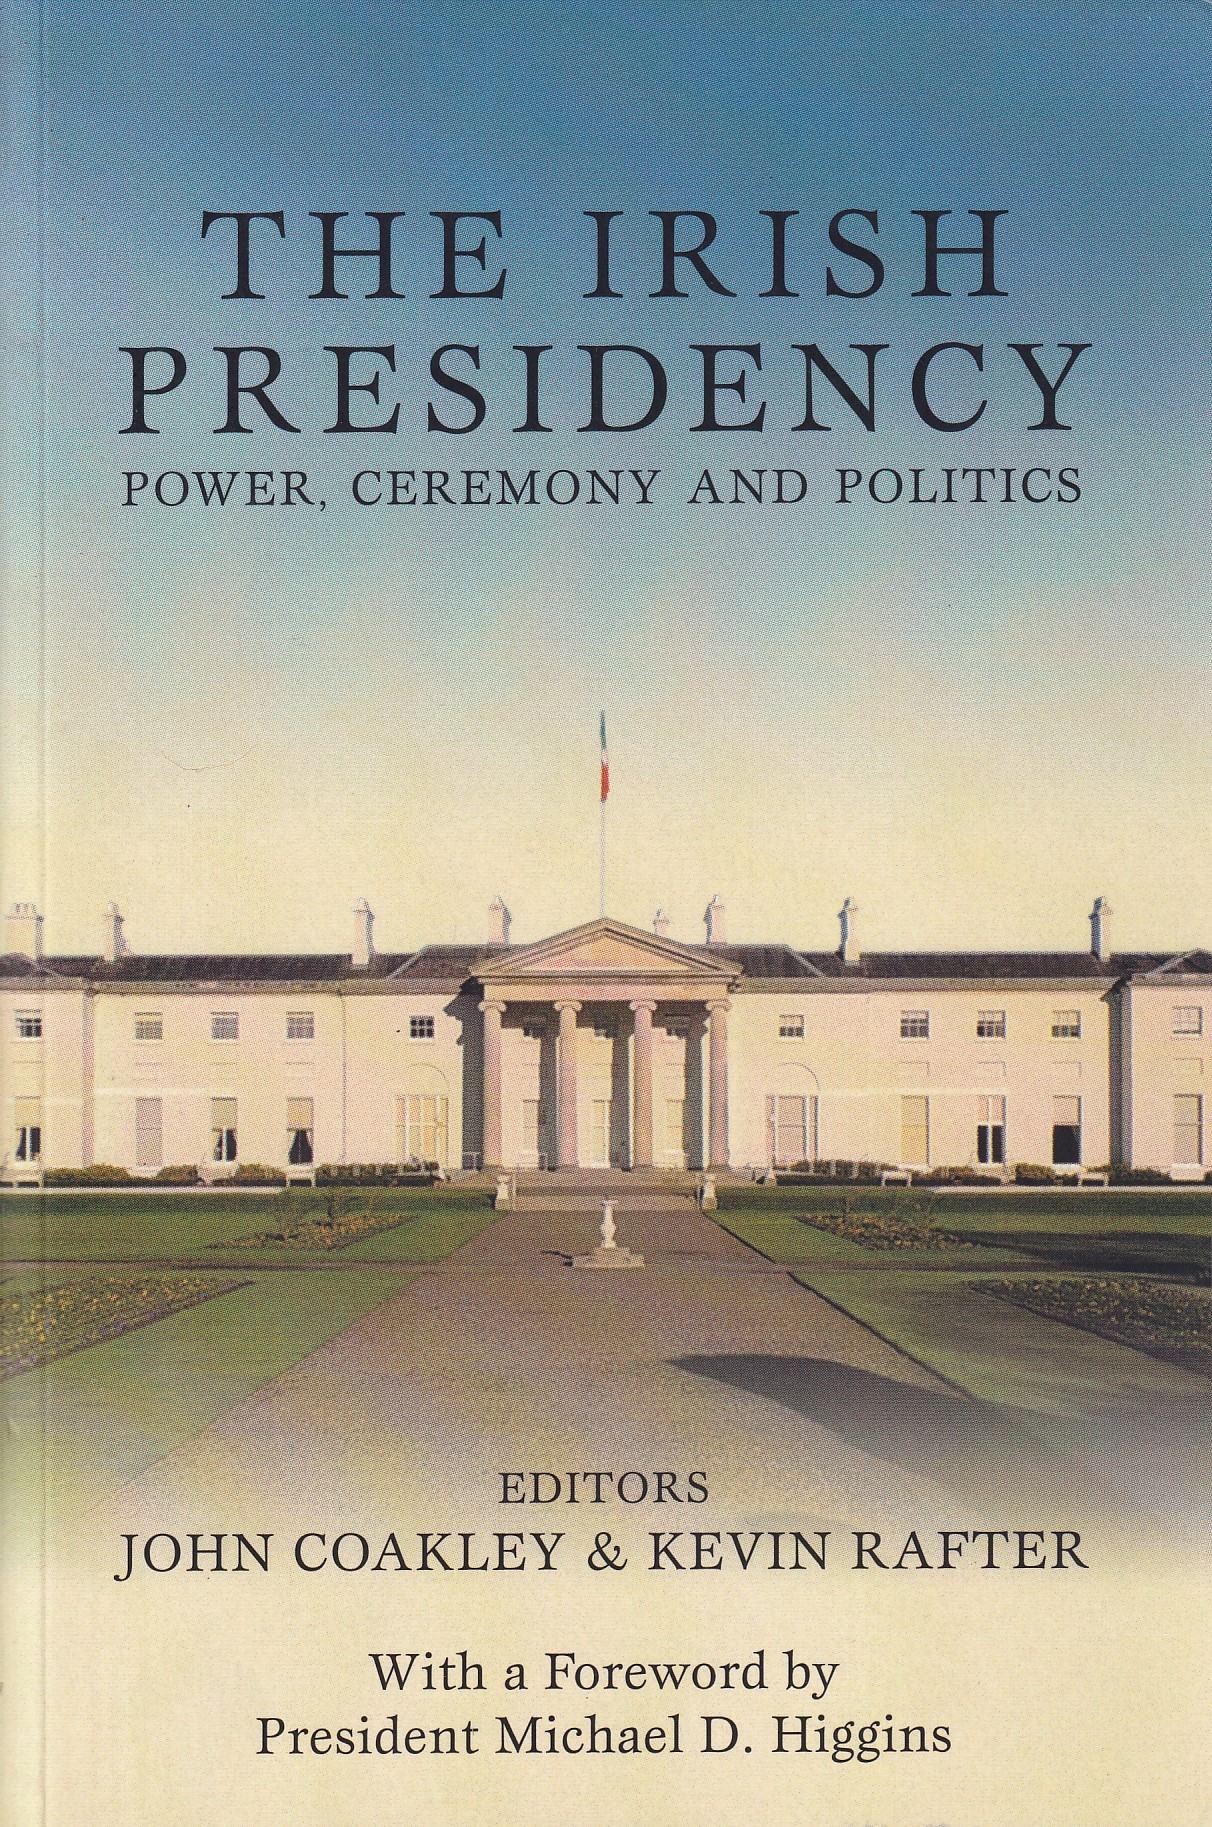 The Irish Presidency: Power, Ceremony and Politics | John Coakley & Kevin Rafter (eds.) | Charlie Byrne's